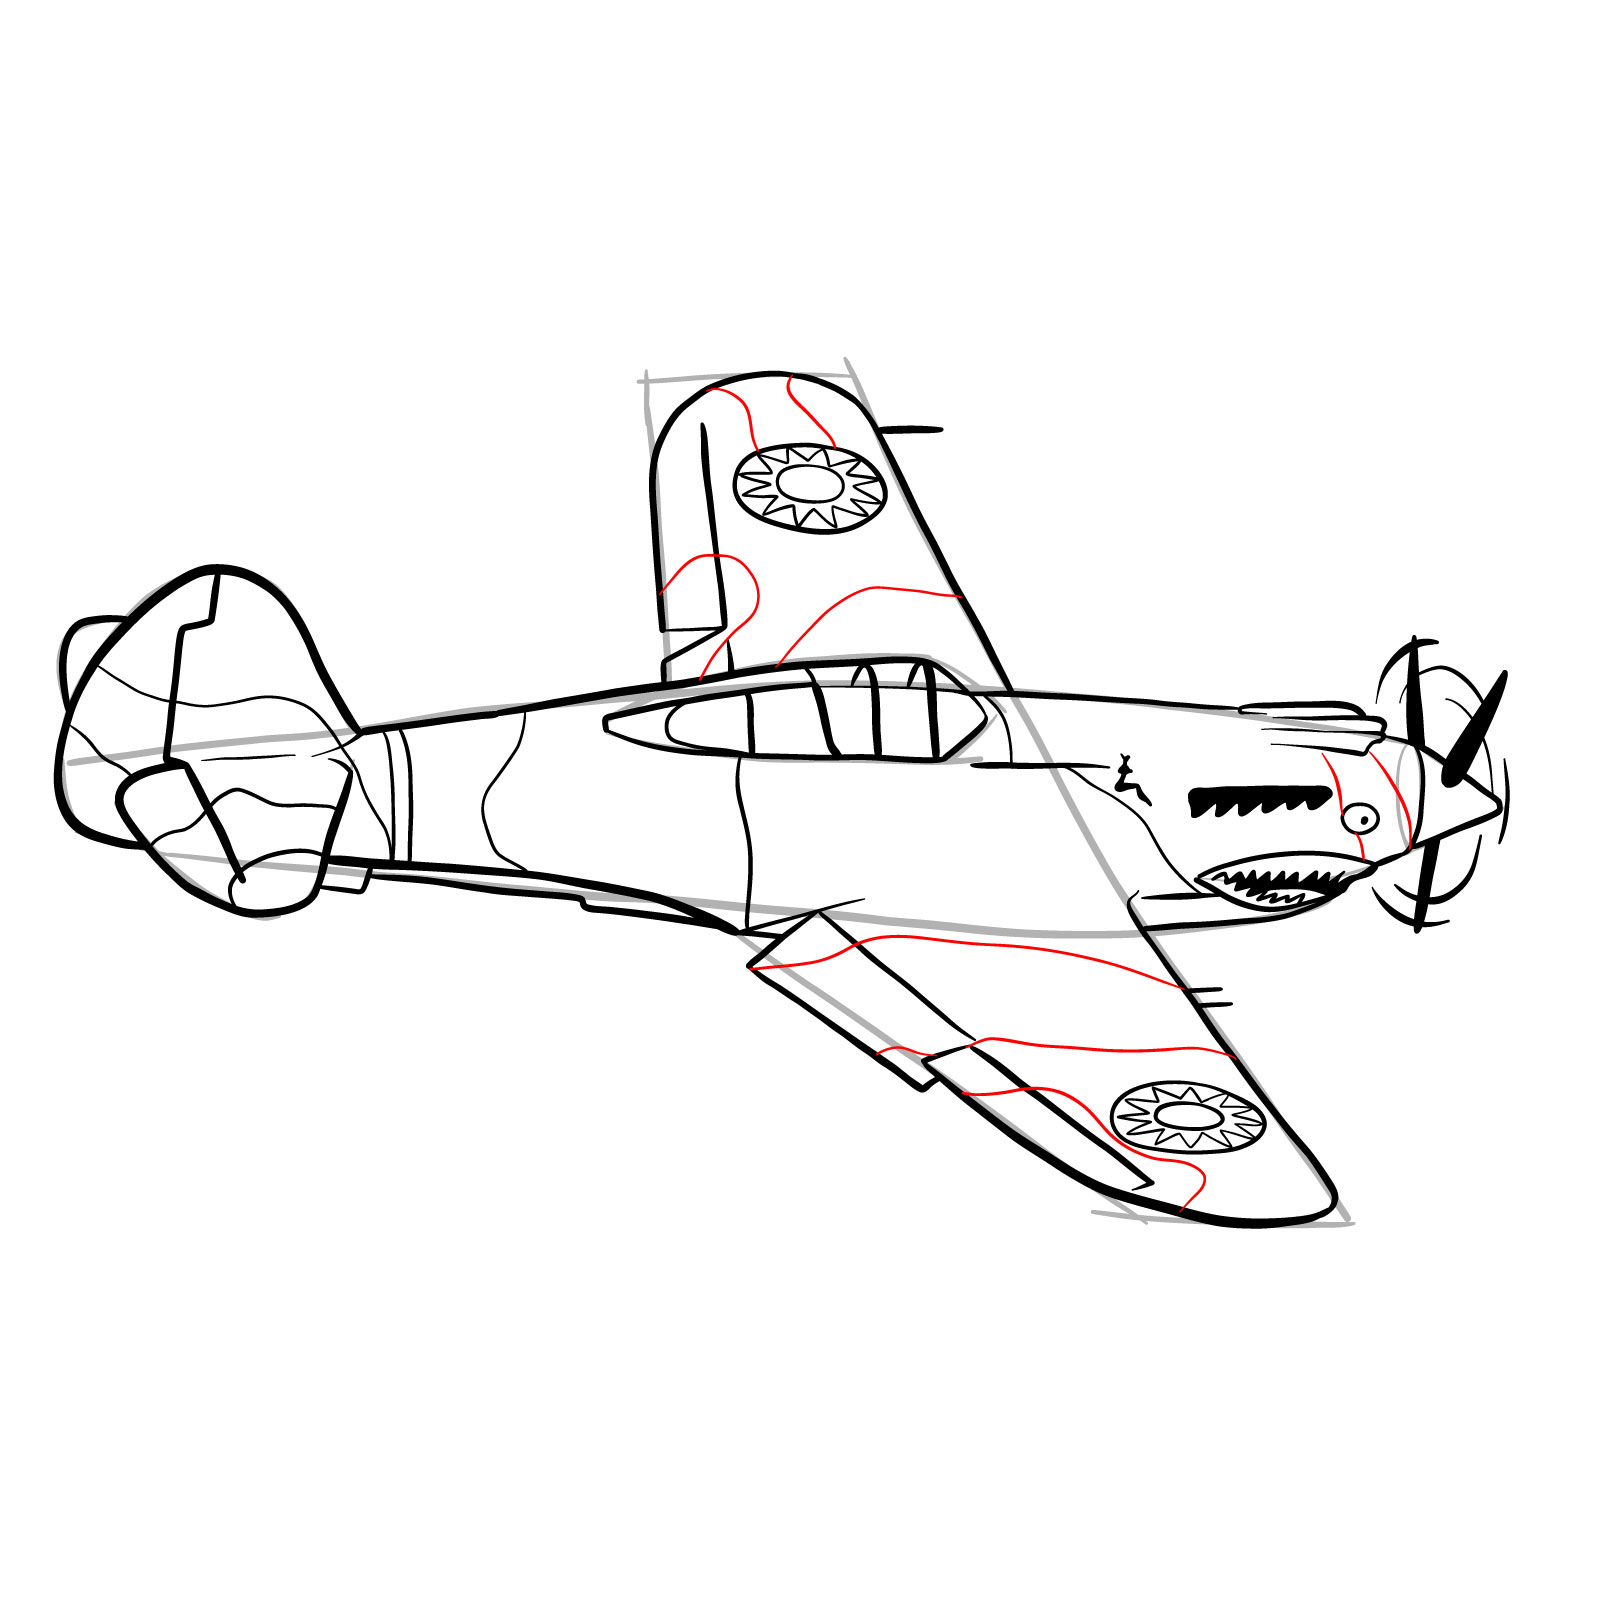 How to draw a P-40 Flying Tiger - step 31